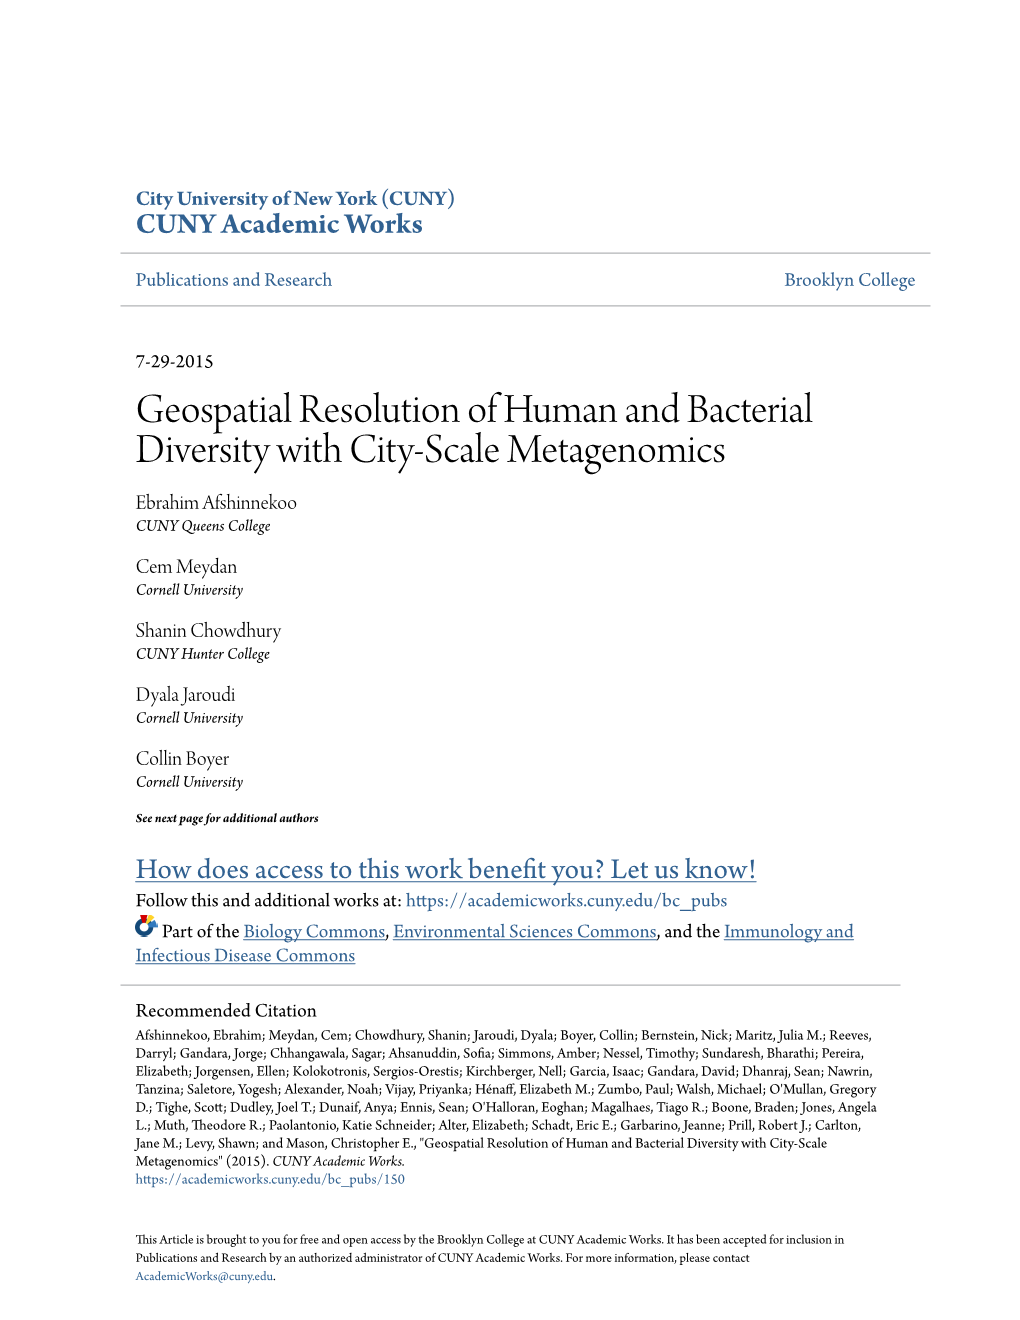 Geospatial Resolution of Human and Bacterial Diversity with City-Scale Metagenomics Ebrahim Afshinnekoo CUNY Queens College